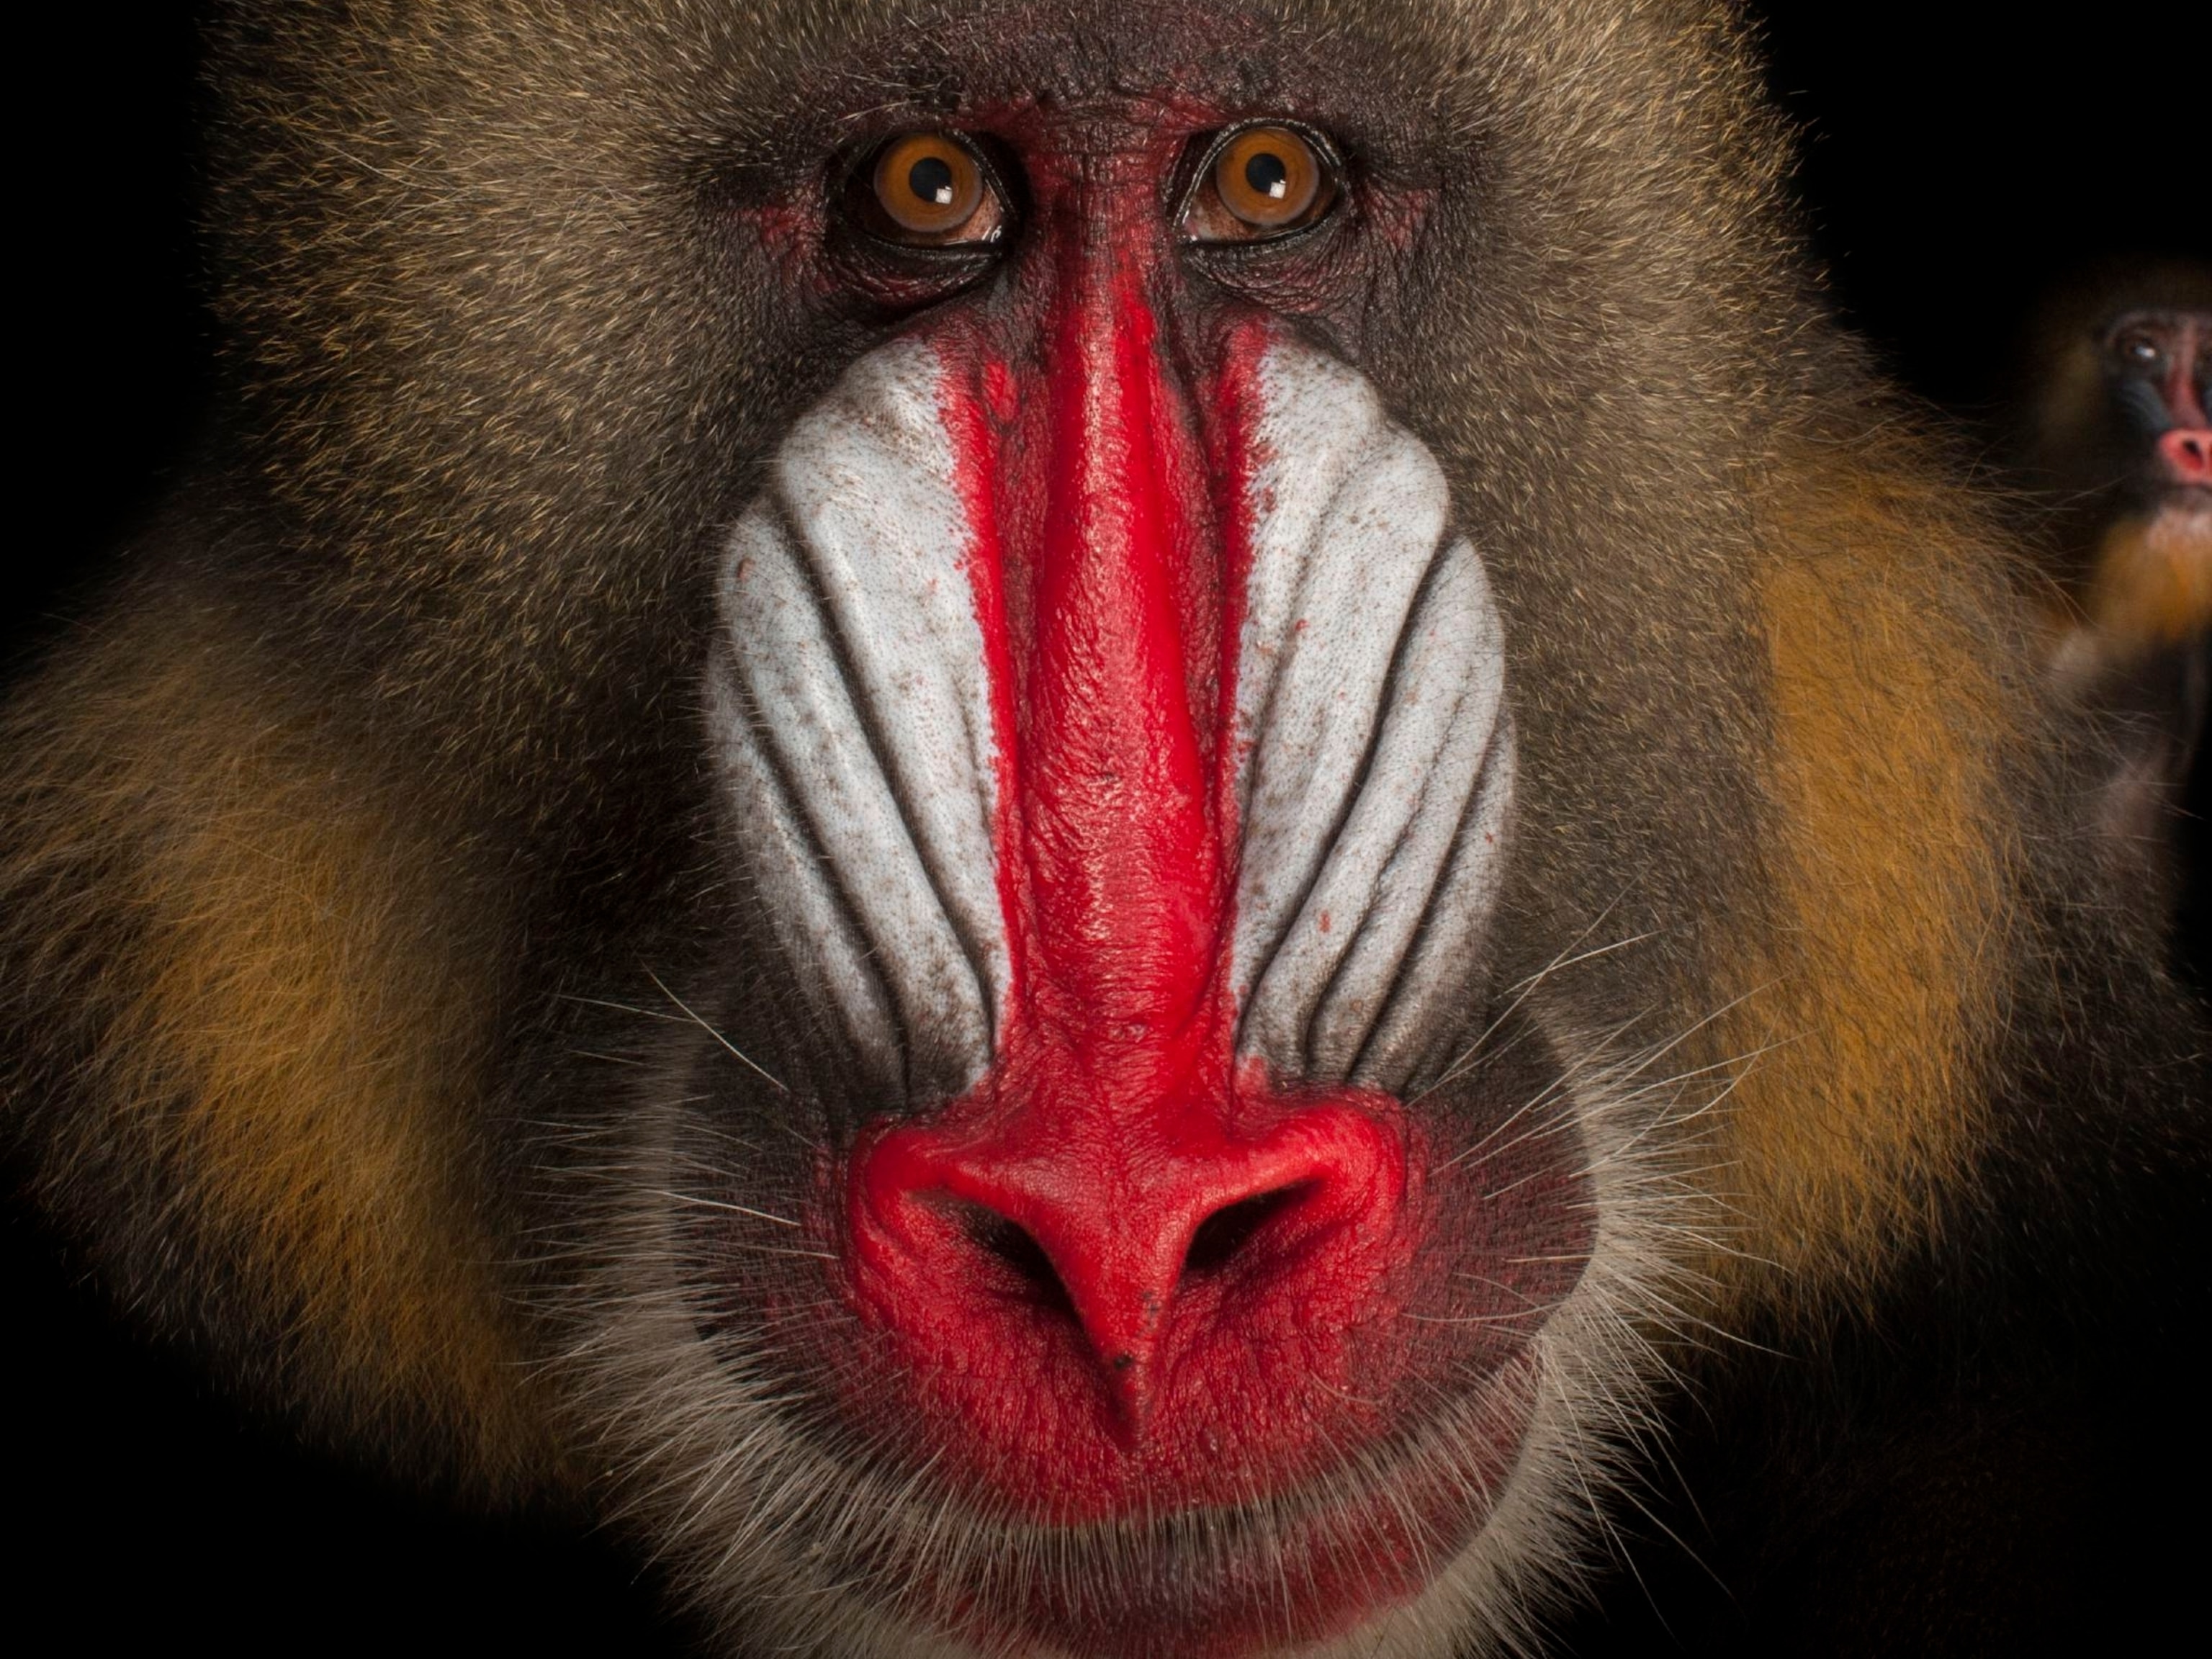 A mandrill is what type of creature?